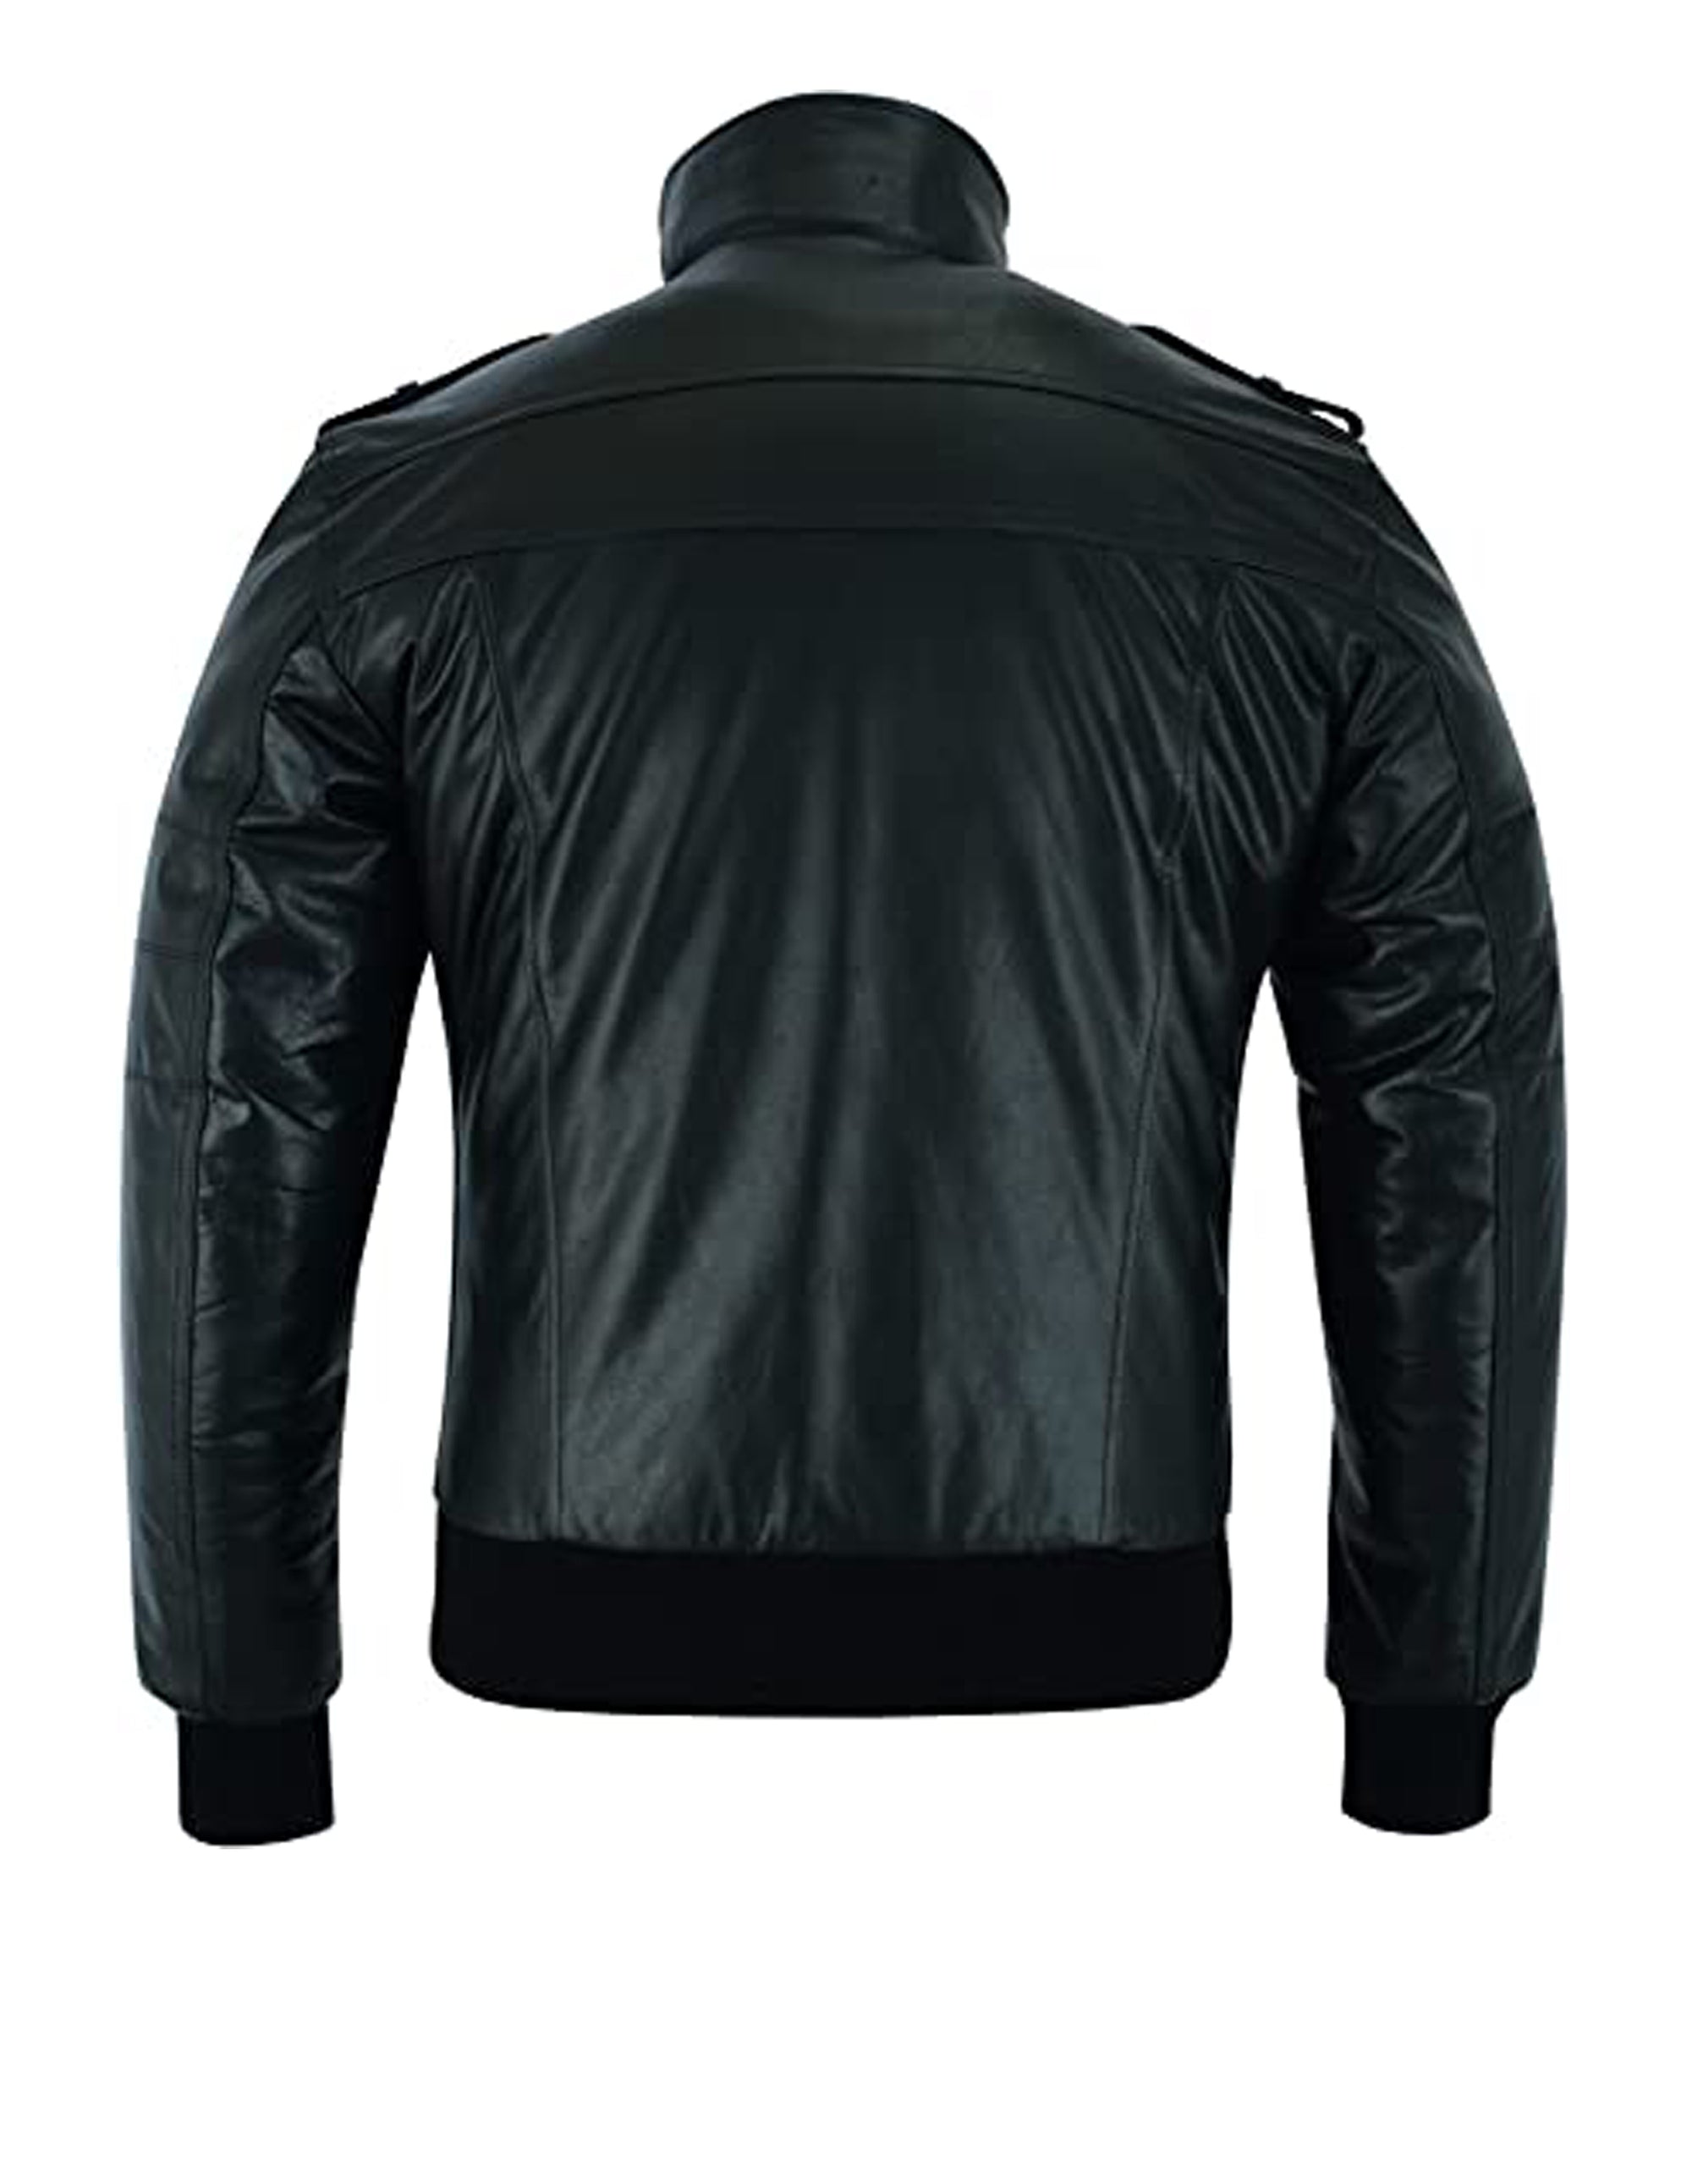 Men Black Leather Motorcycle Jacket with Removable Hood